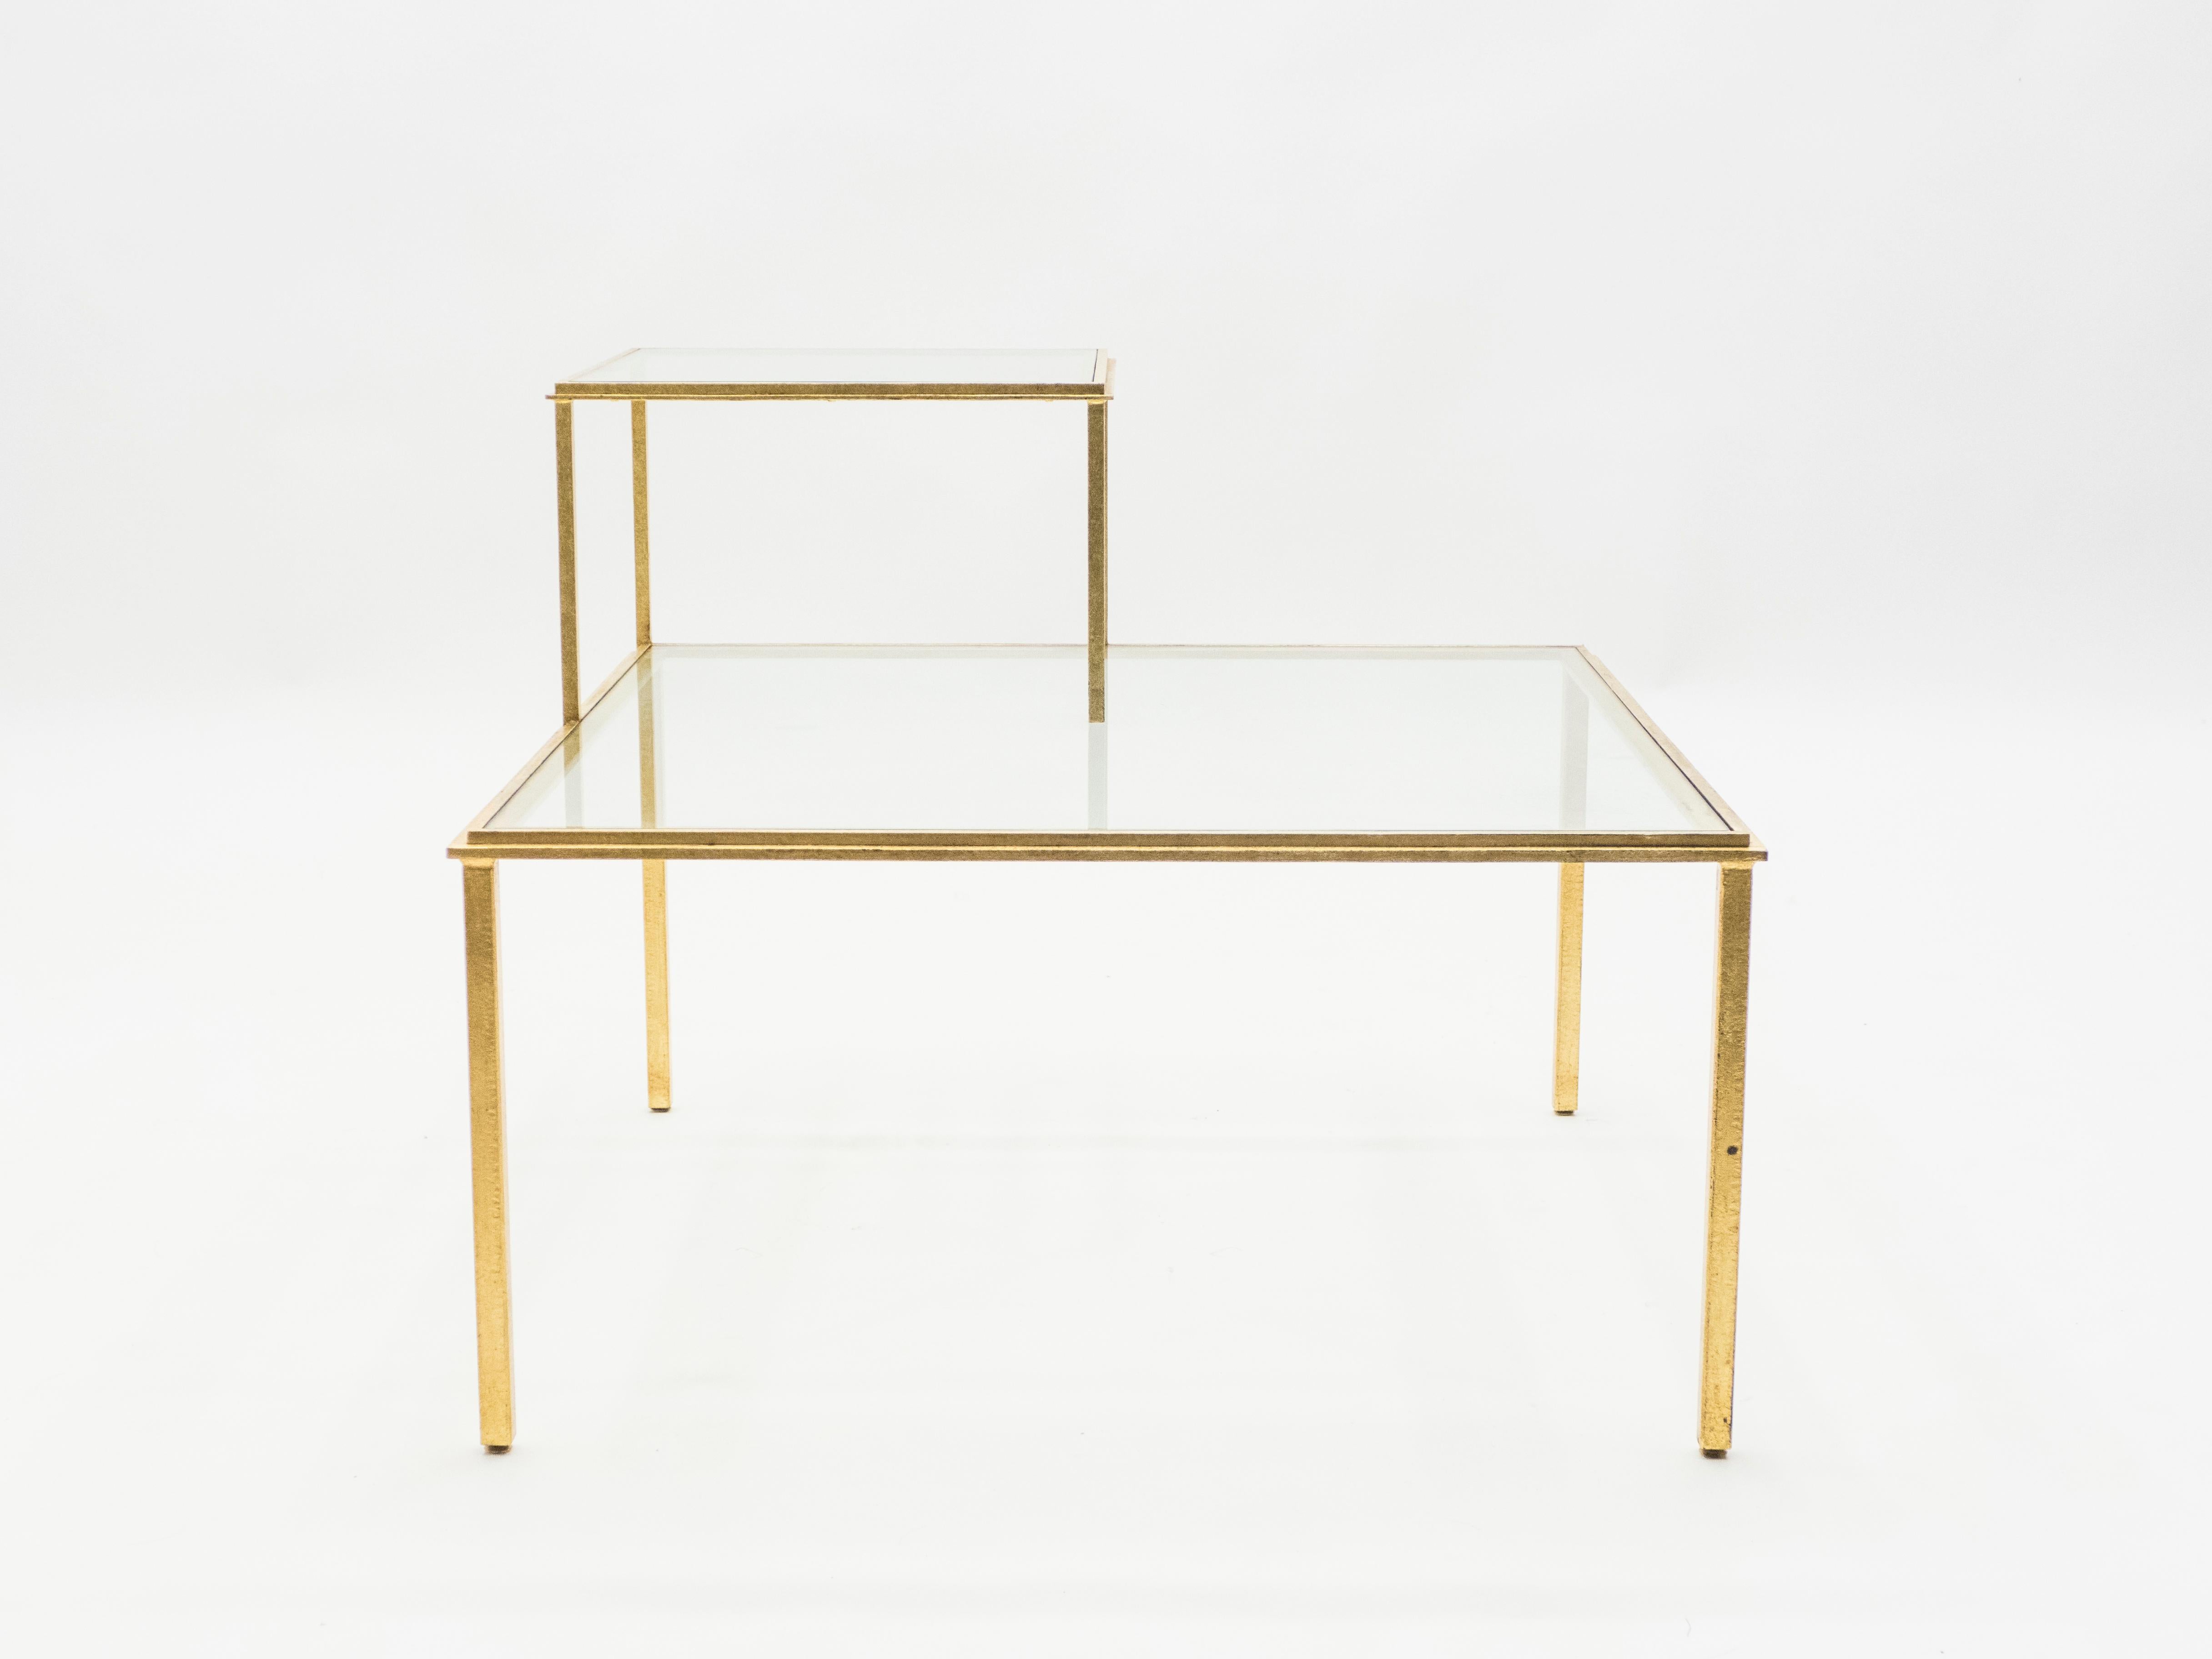 Roger Thibier Gilt Wrought Iron Glass Coffee or End Table, 1960s For Sale 1